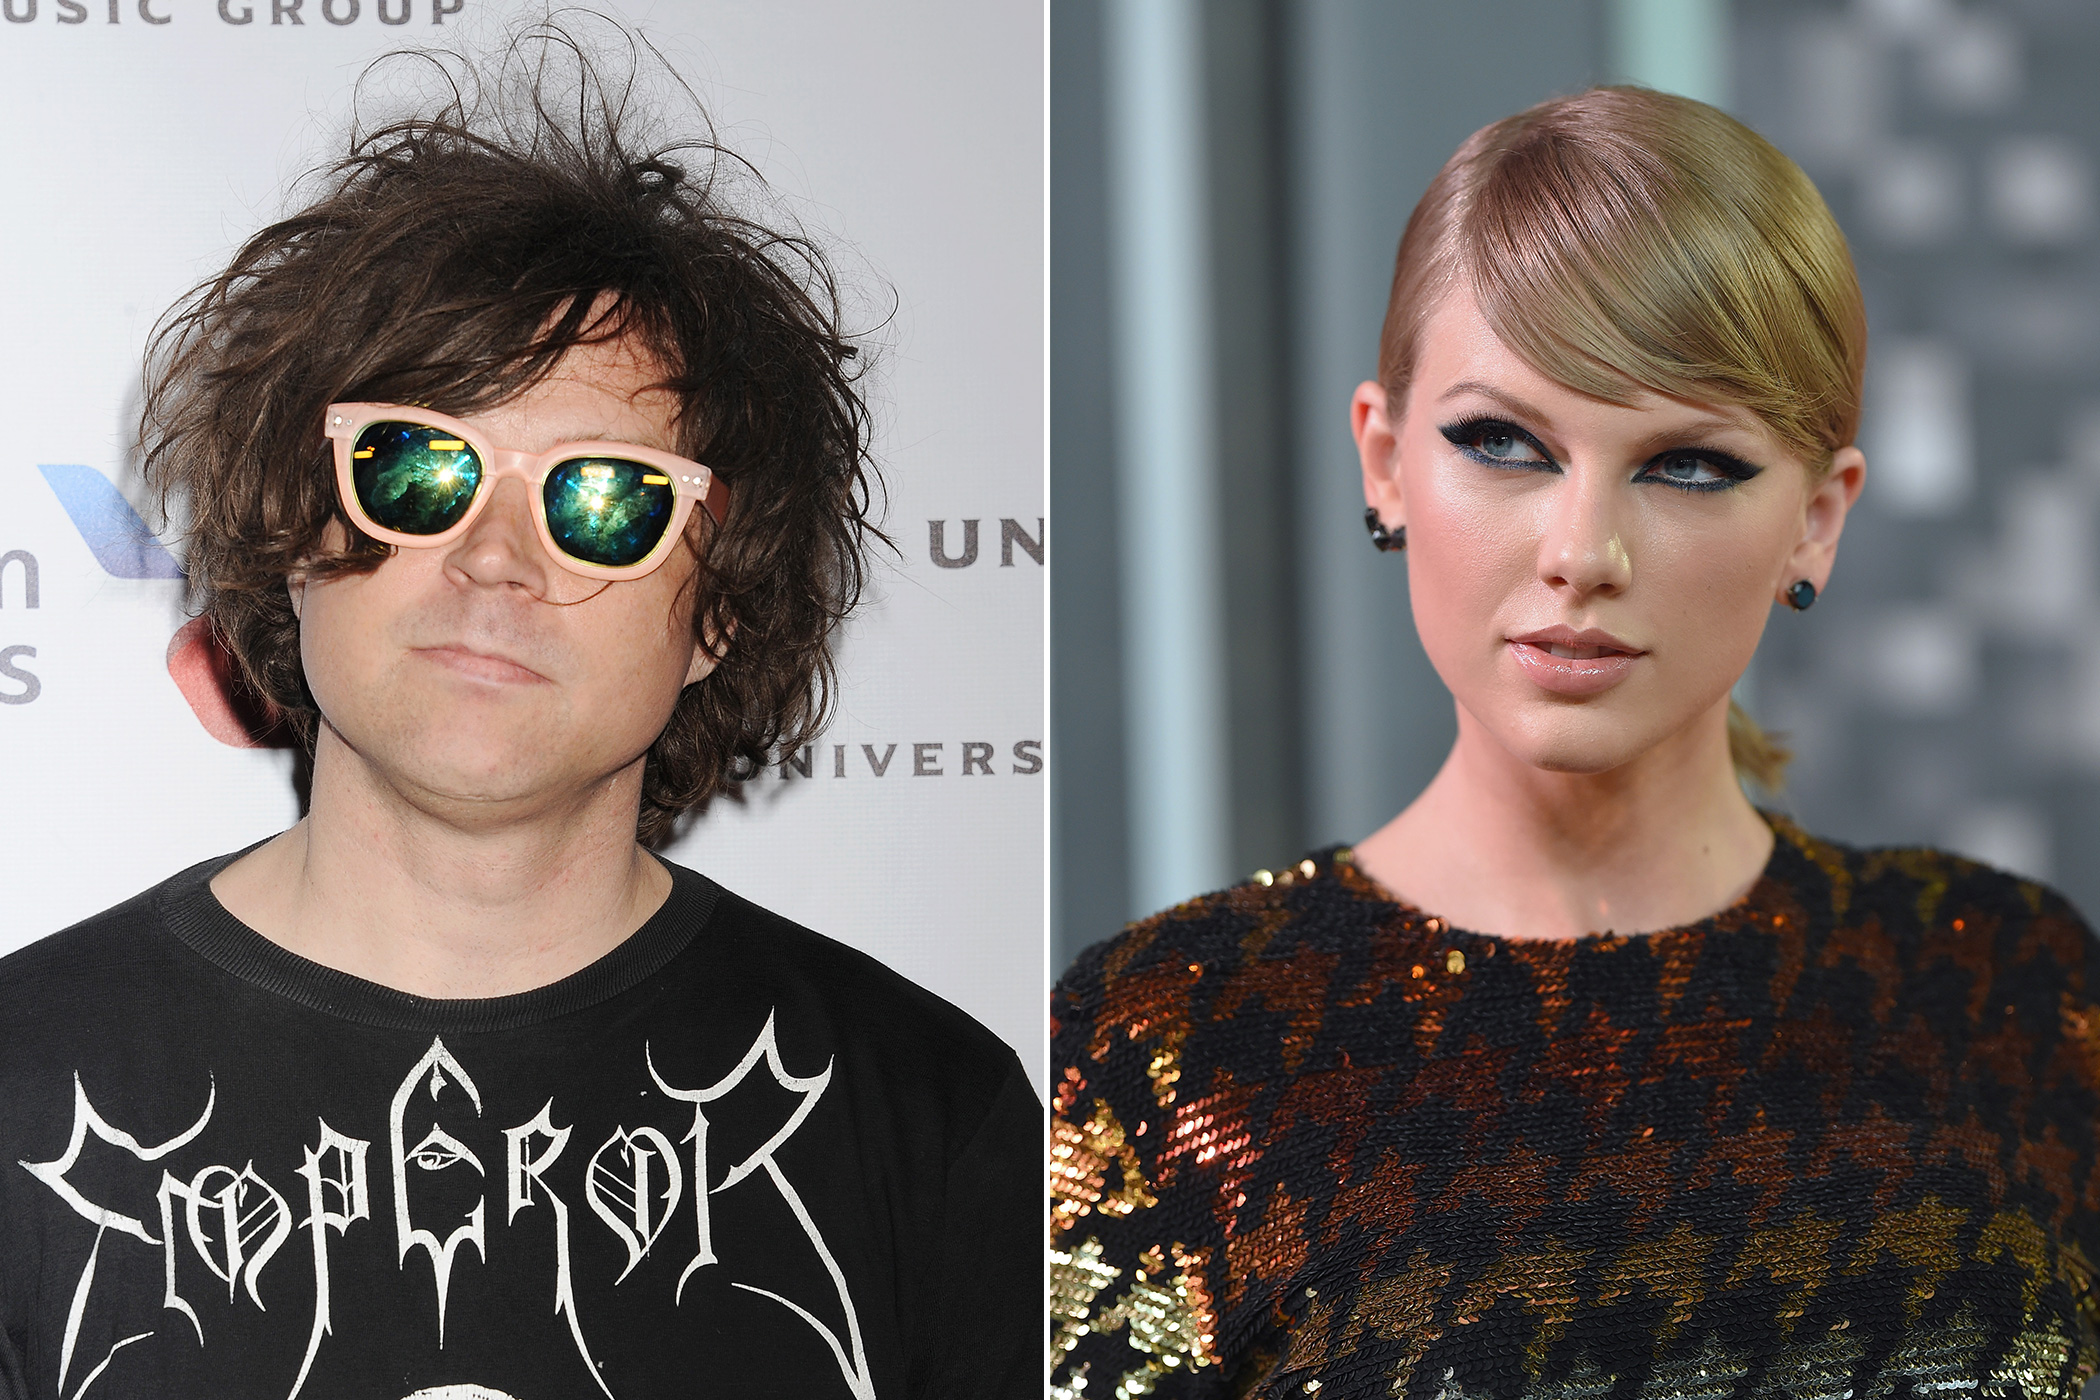 <b>Left:</b>Ryan Adams attends the Universal Music Group 2015 Post GRAMMY Party at The Theatre Ace Hotel Downtown LA on Feb. 8, 2015 in Los Angeles; <b>Right:</b>Taylor Swift arrives at the 2015 MTV Video Music Awards at Microsoft Theater on Aug. 30, 2015 in Los Angeles (Jeffrey Mayer—WireImage/Getty Images; Axelle/Bauer-Griffin—FilmMagic/Getty Images)